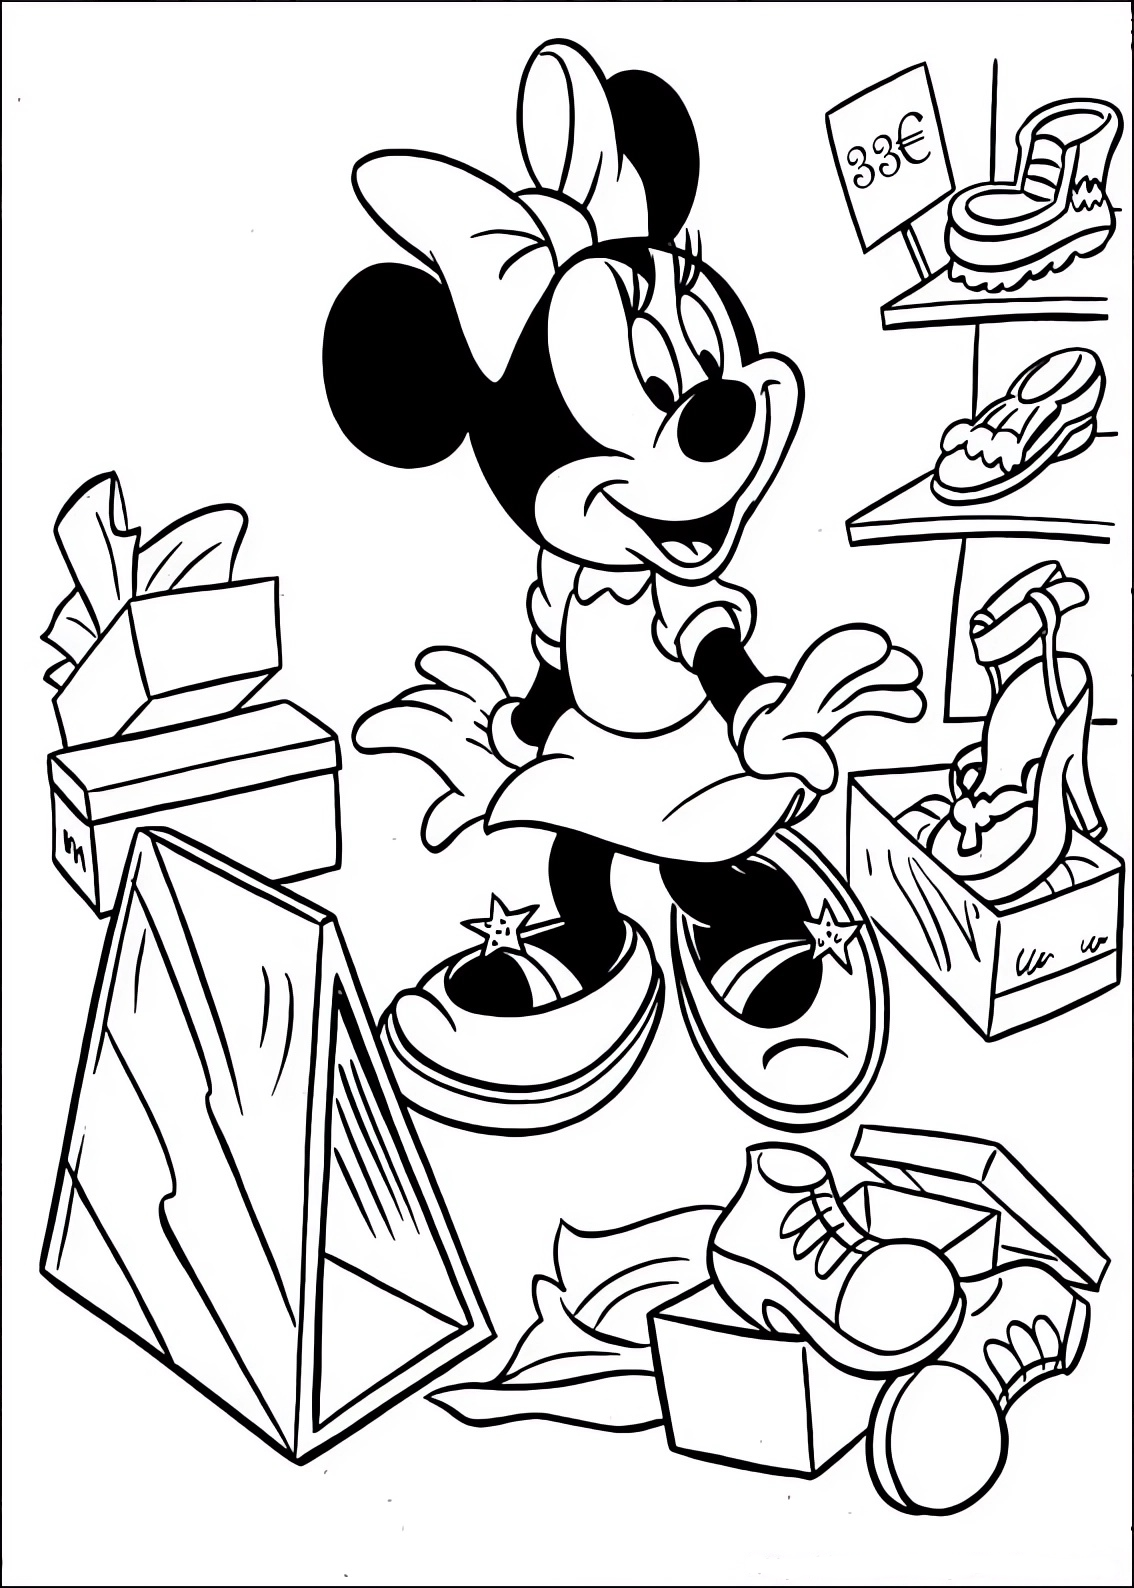 Coloring page of Minnie choosing which shoes to buy